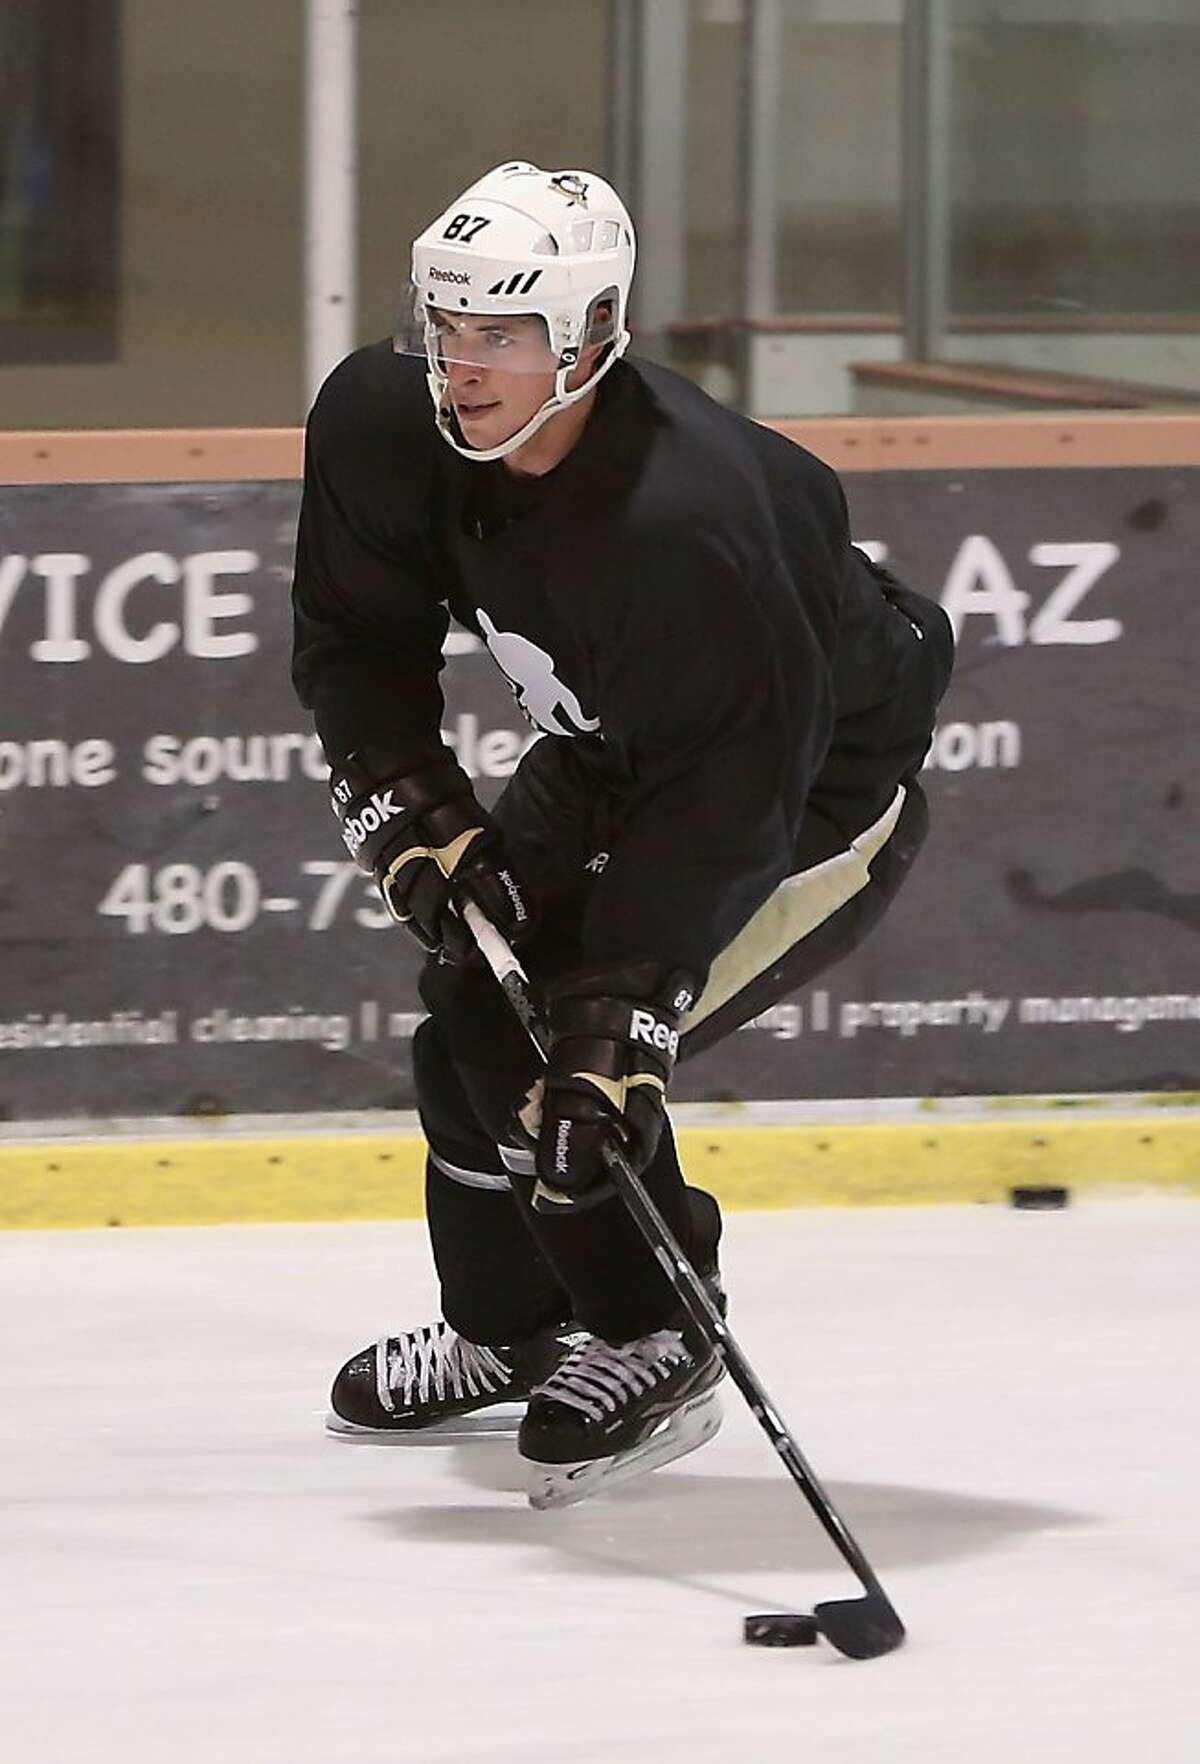 SCOTTSDALE, AZ - DECEMBER 03: Sidney Crosby #87 of the Pittsburgh Penguins participates in a workout at the Ice Den on December 3, 2012 in Scottsdale, Arizona. More than a dozen players from around the league that are not able to play during the NHL lockout have been attending workouts at the Phoenix Coyotes practice rink. (Photo by Christian Petersen/Getty Images)